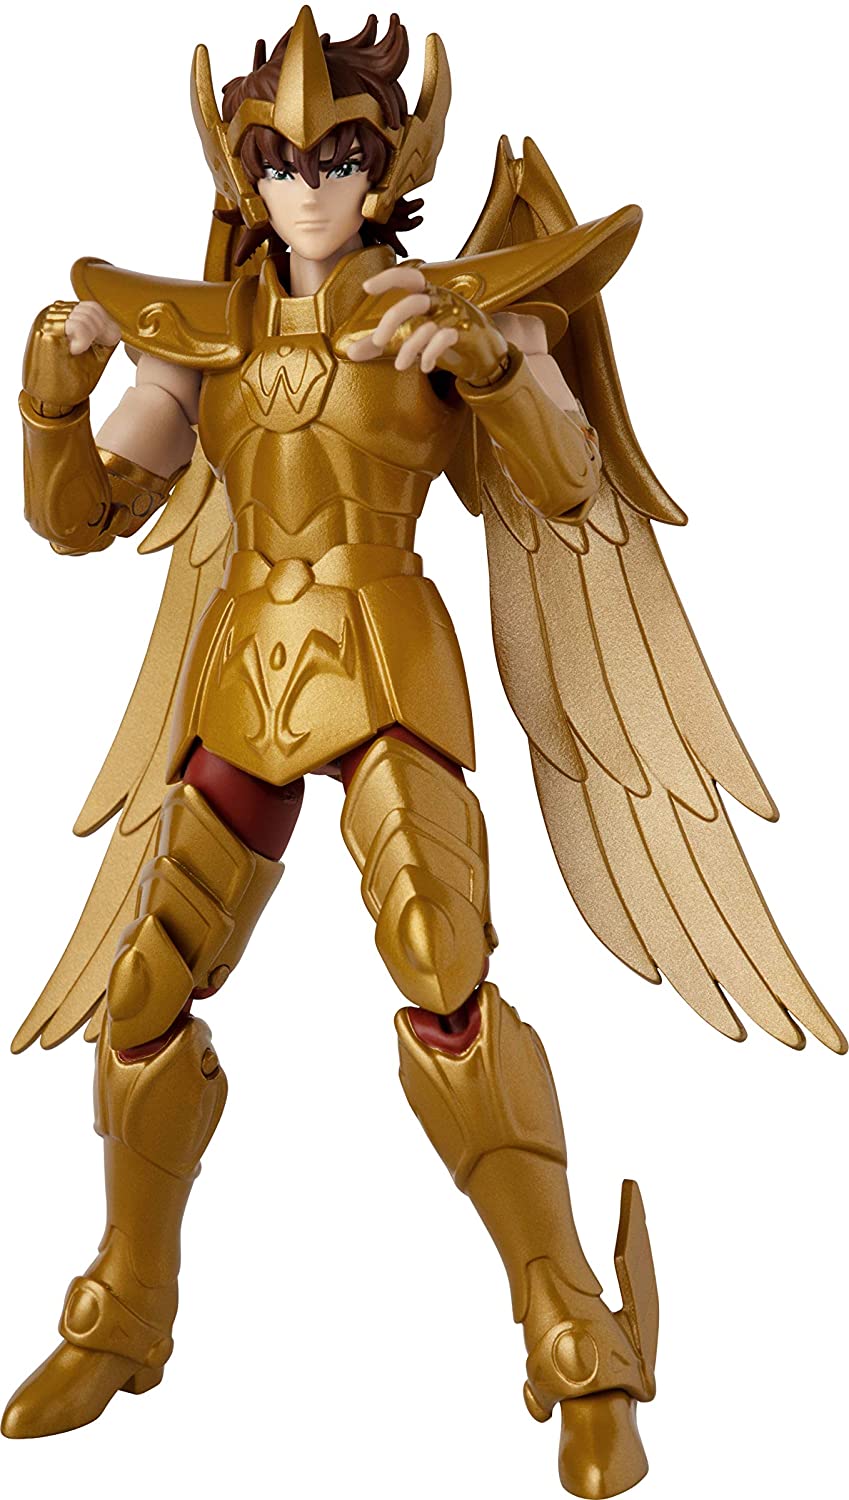 Anime Heroes KNIGHTS OF THE ZODIAC Sagittarius Aiolos Action Figure Super Anime Store